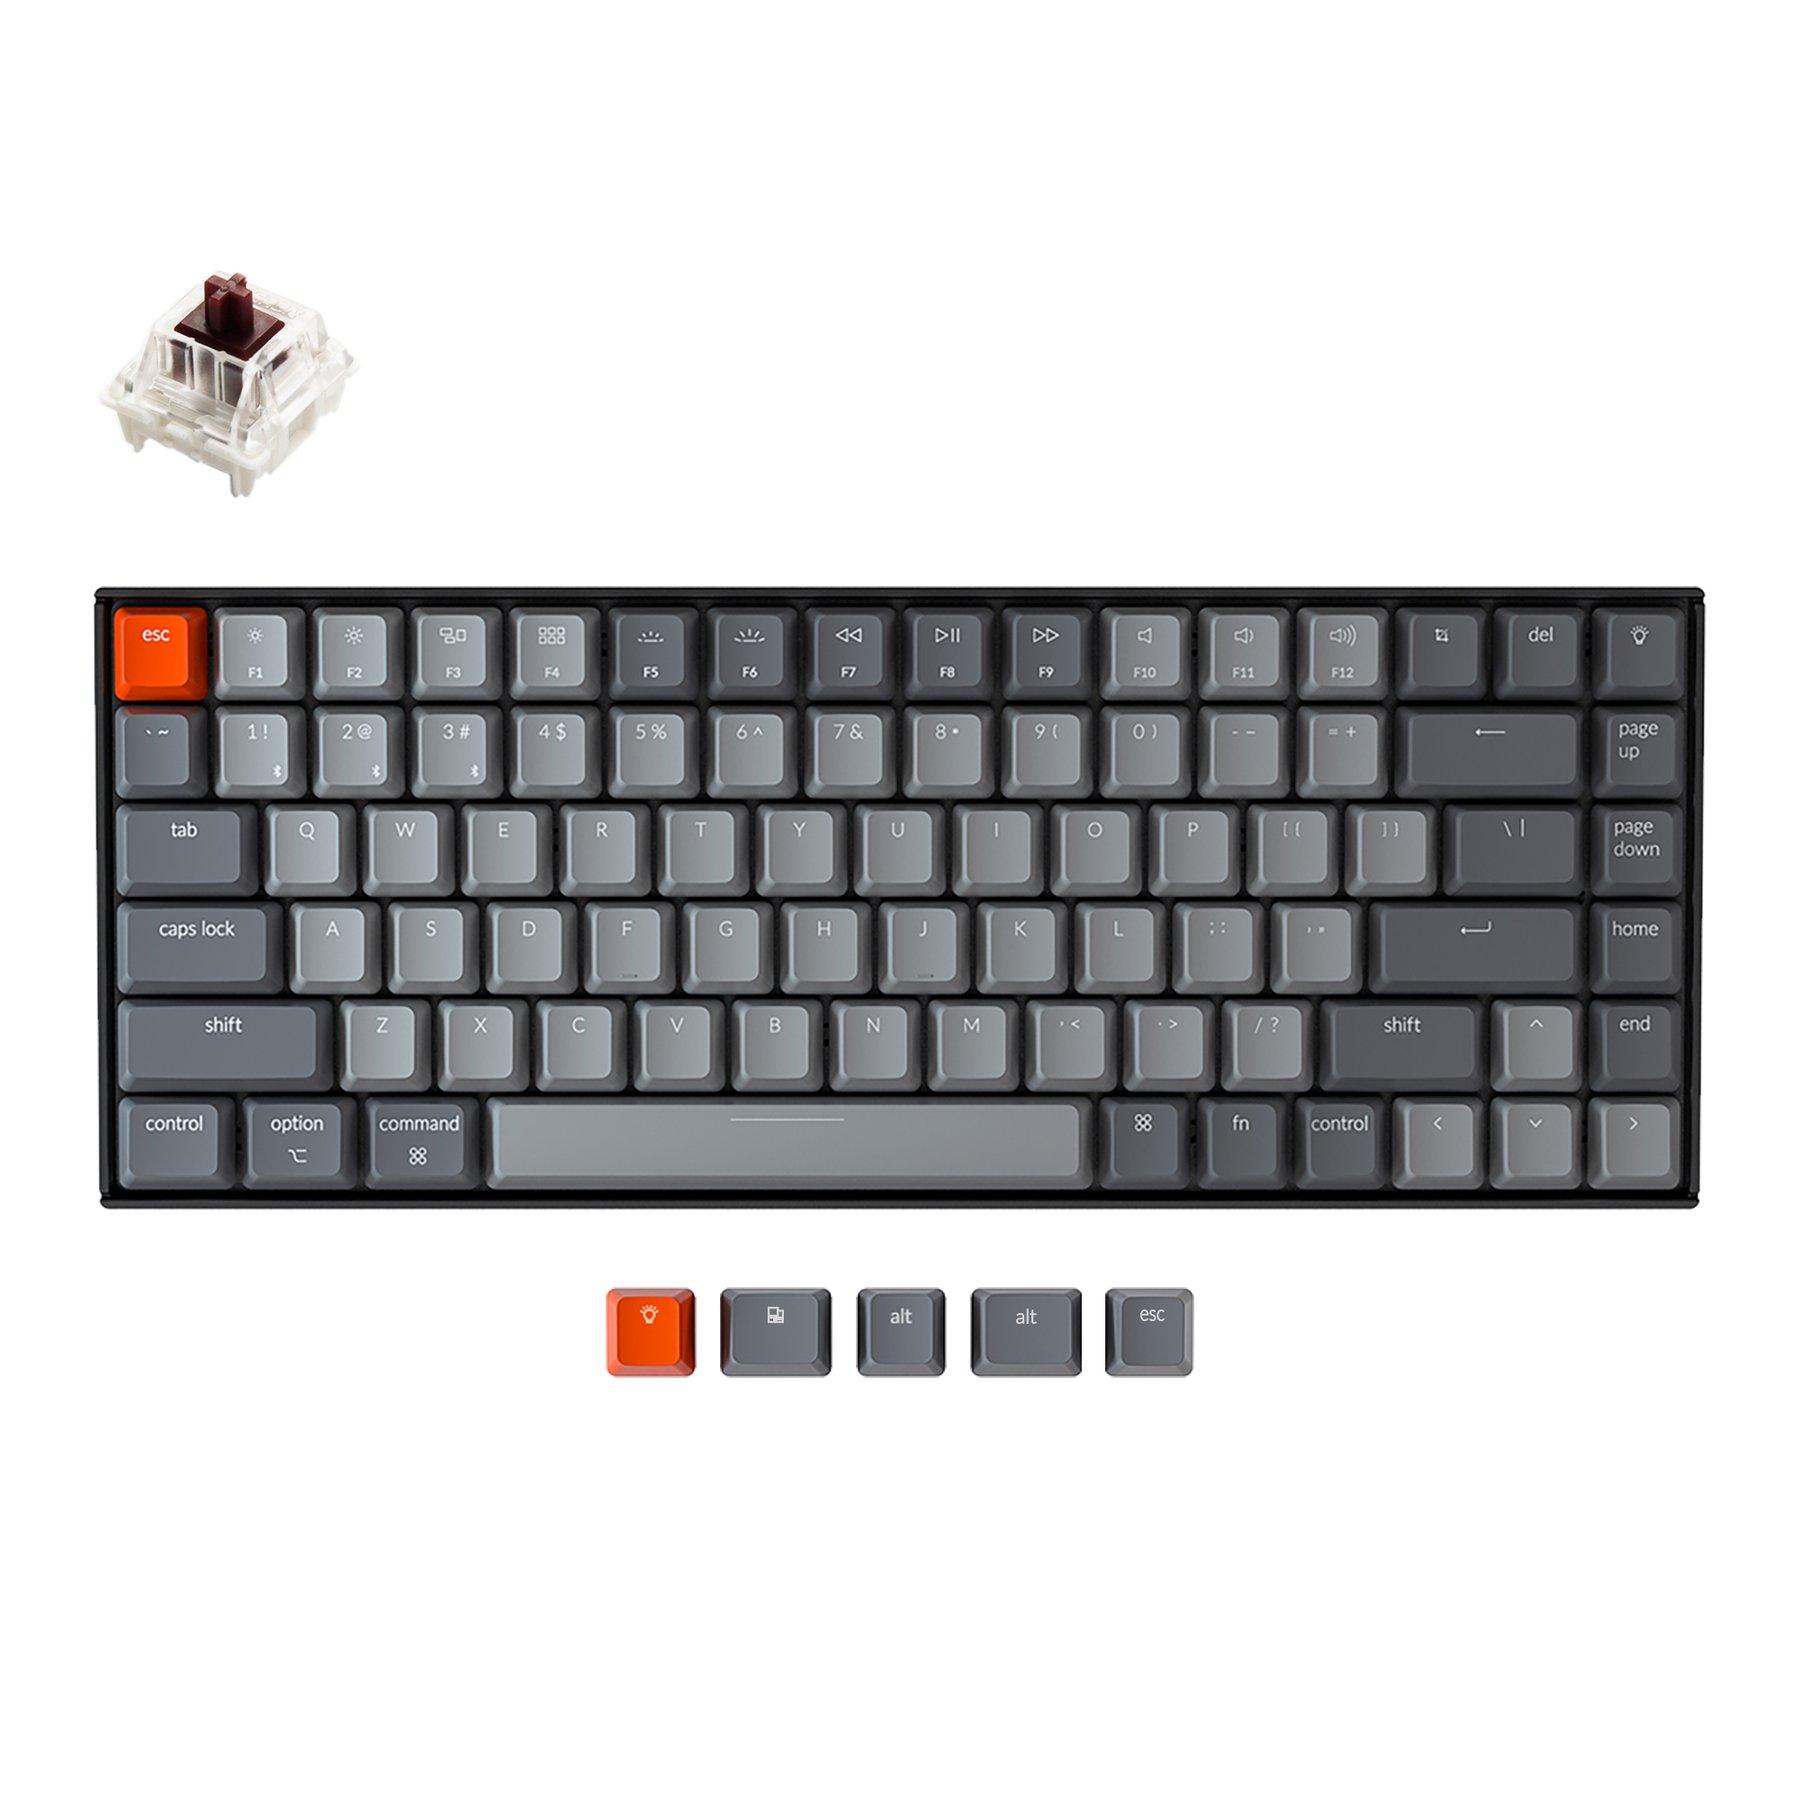 Keychron K2 84 Gateron Mechanical Keyboard with RGB- Brown Switch and Aluminum Frame